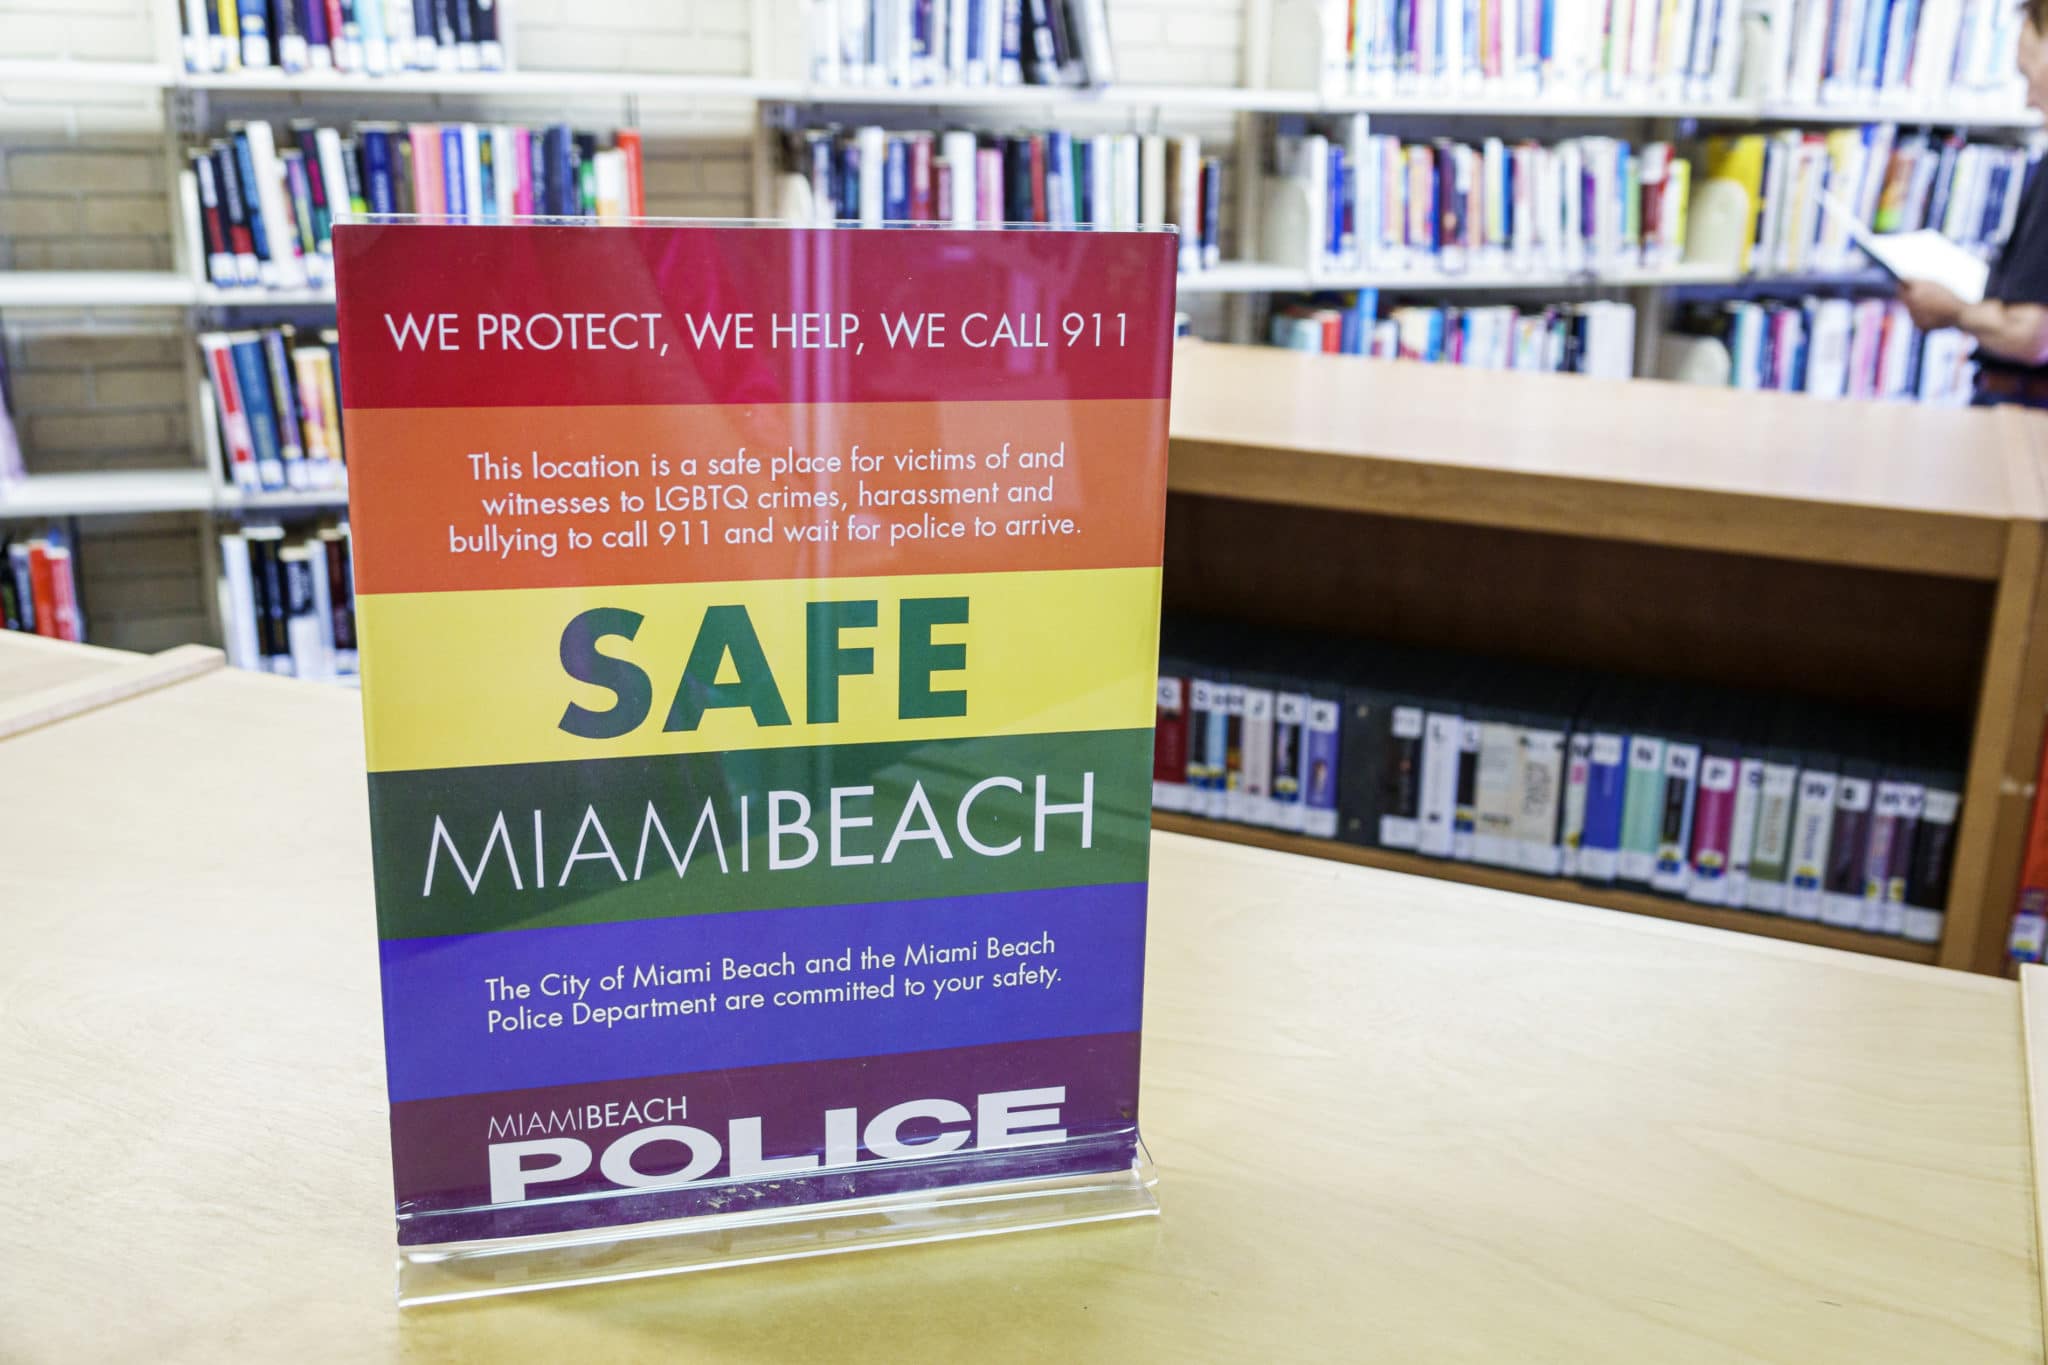 Police departments record and report data on anti-LGBT+ hate crimes differently 